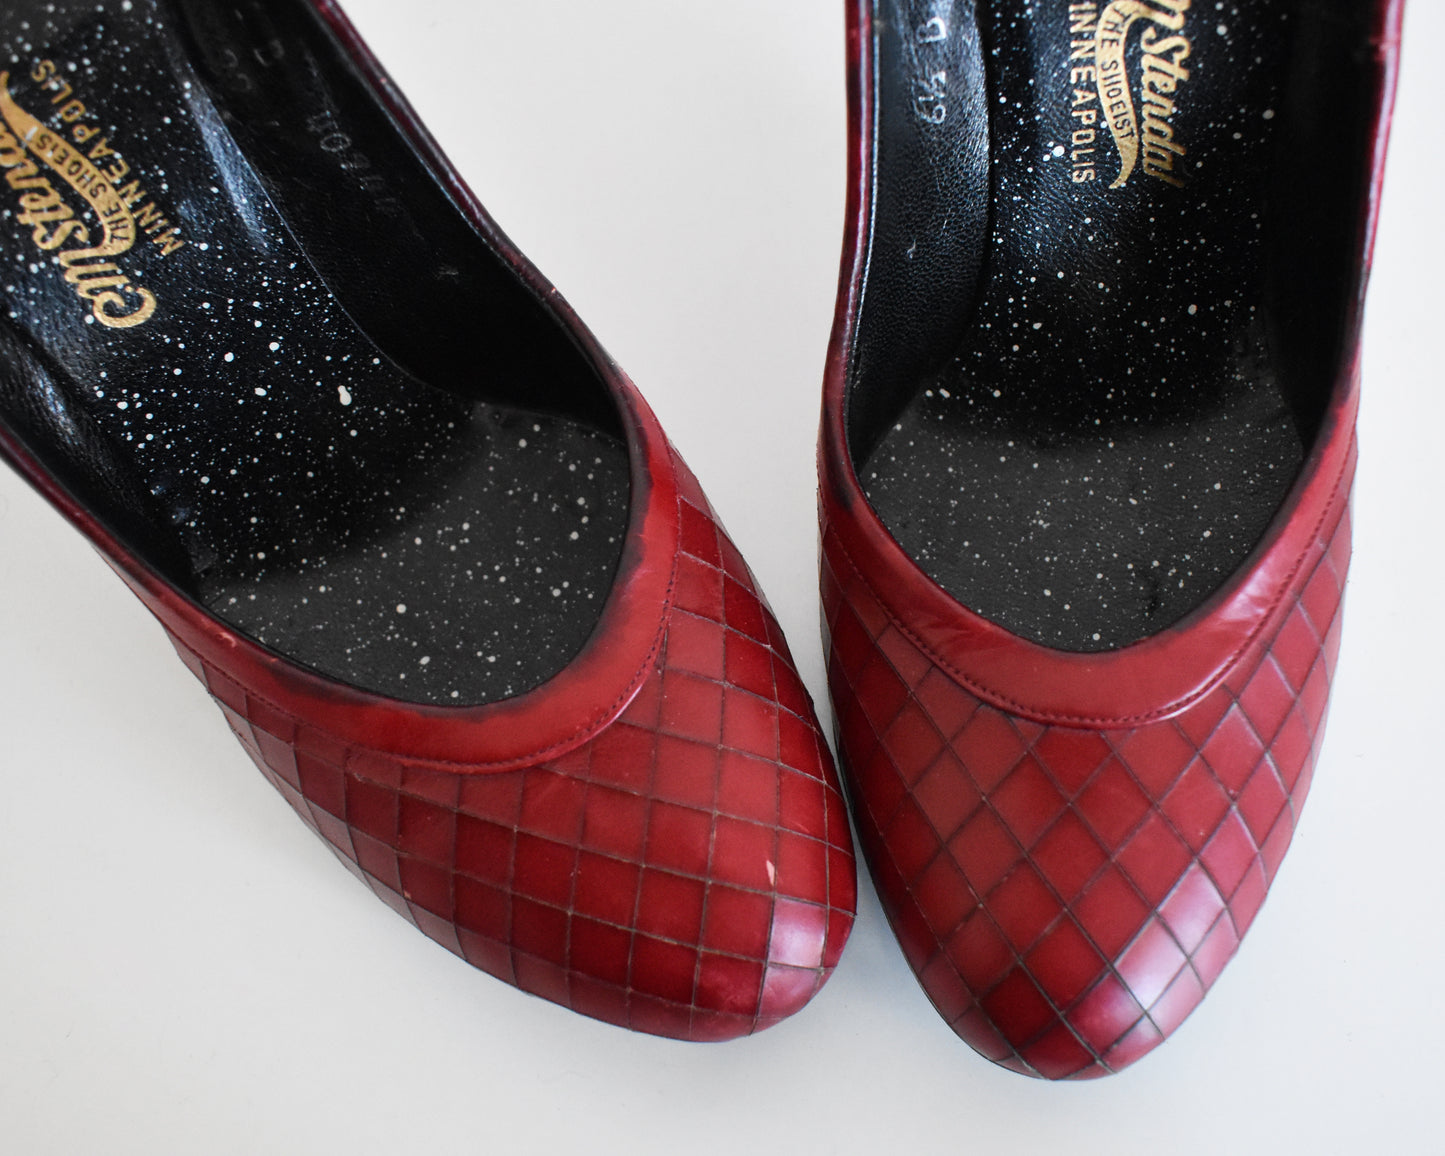 Close up of the toes of a pair of vintage 1960s burgundy criss-cross pattern high heels